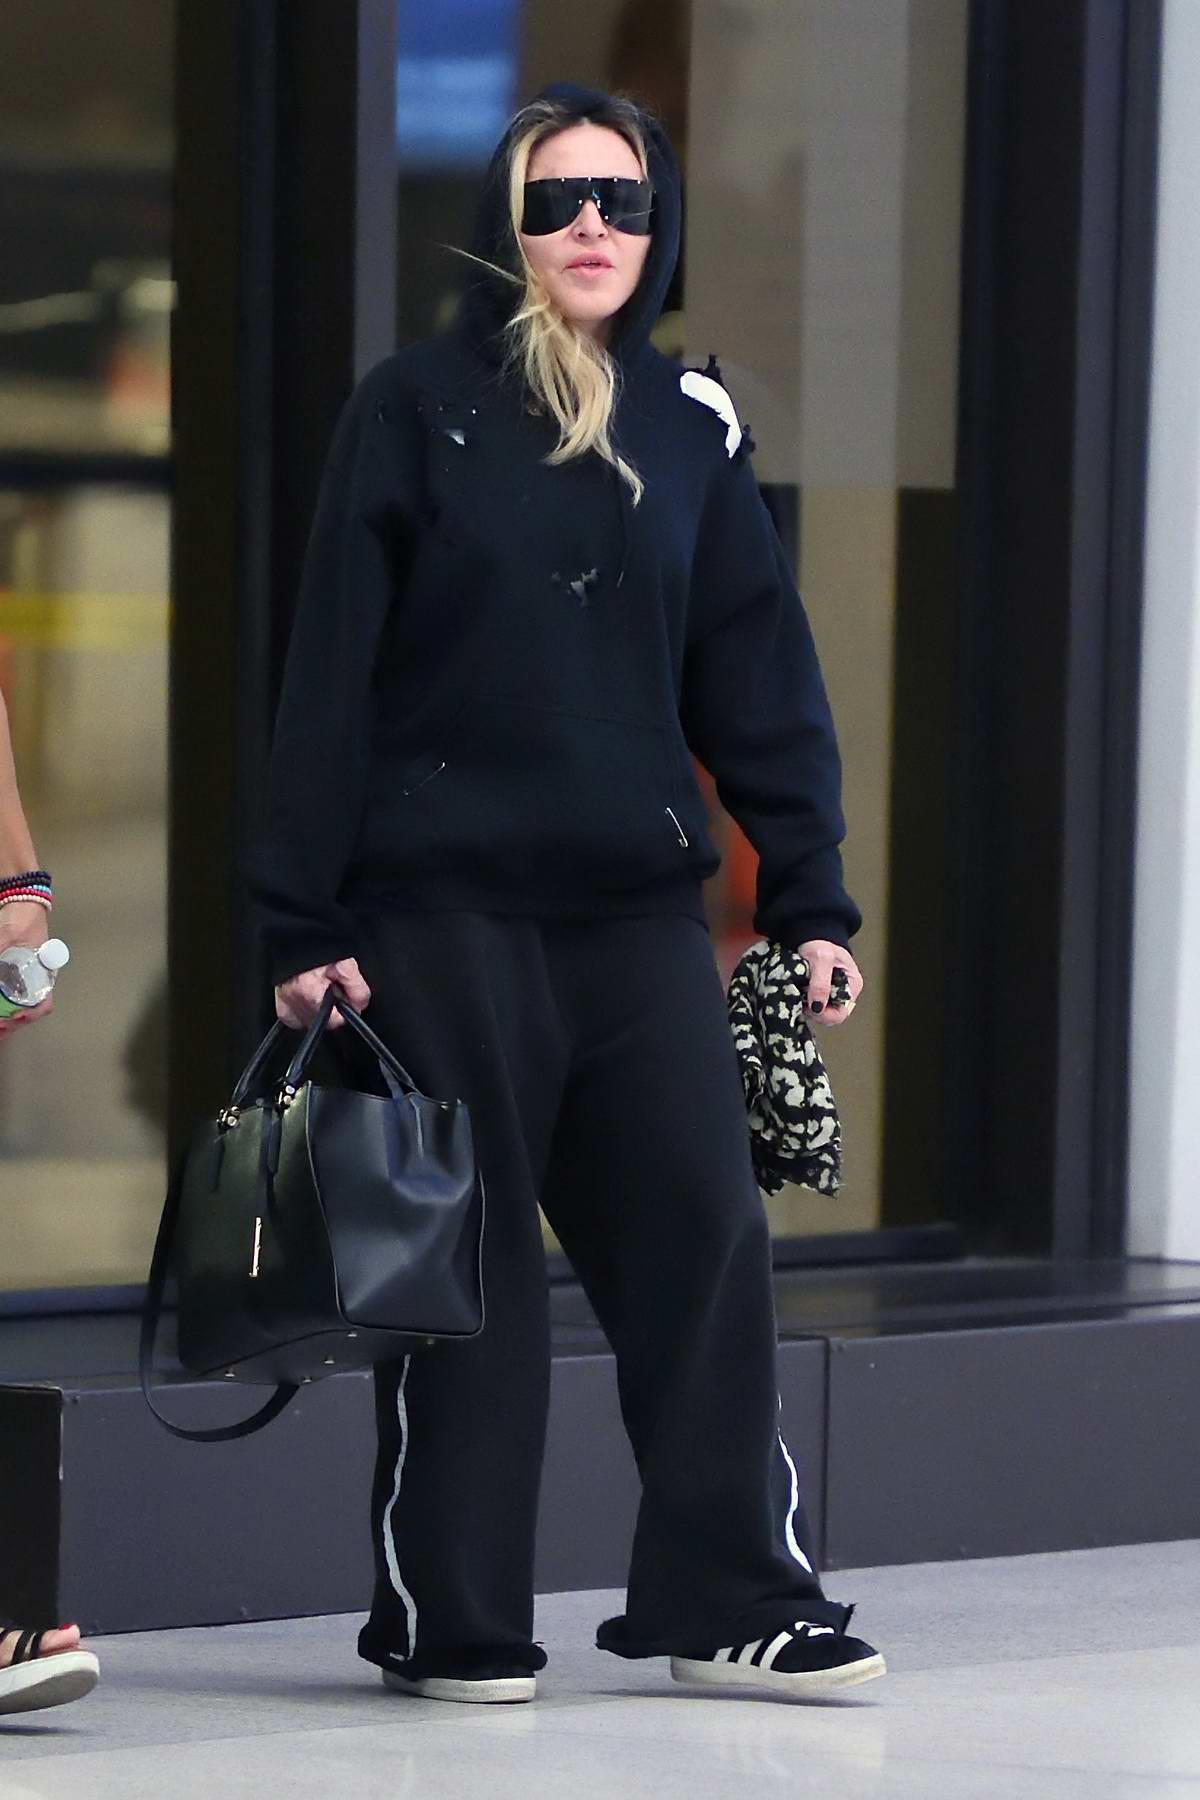 Madonna's in Louis Vuitton's Funky Sandals, Tracksuit at JFK Airport –  Footwear News